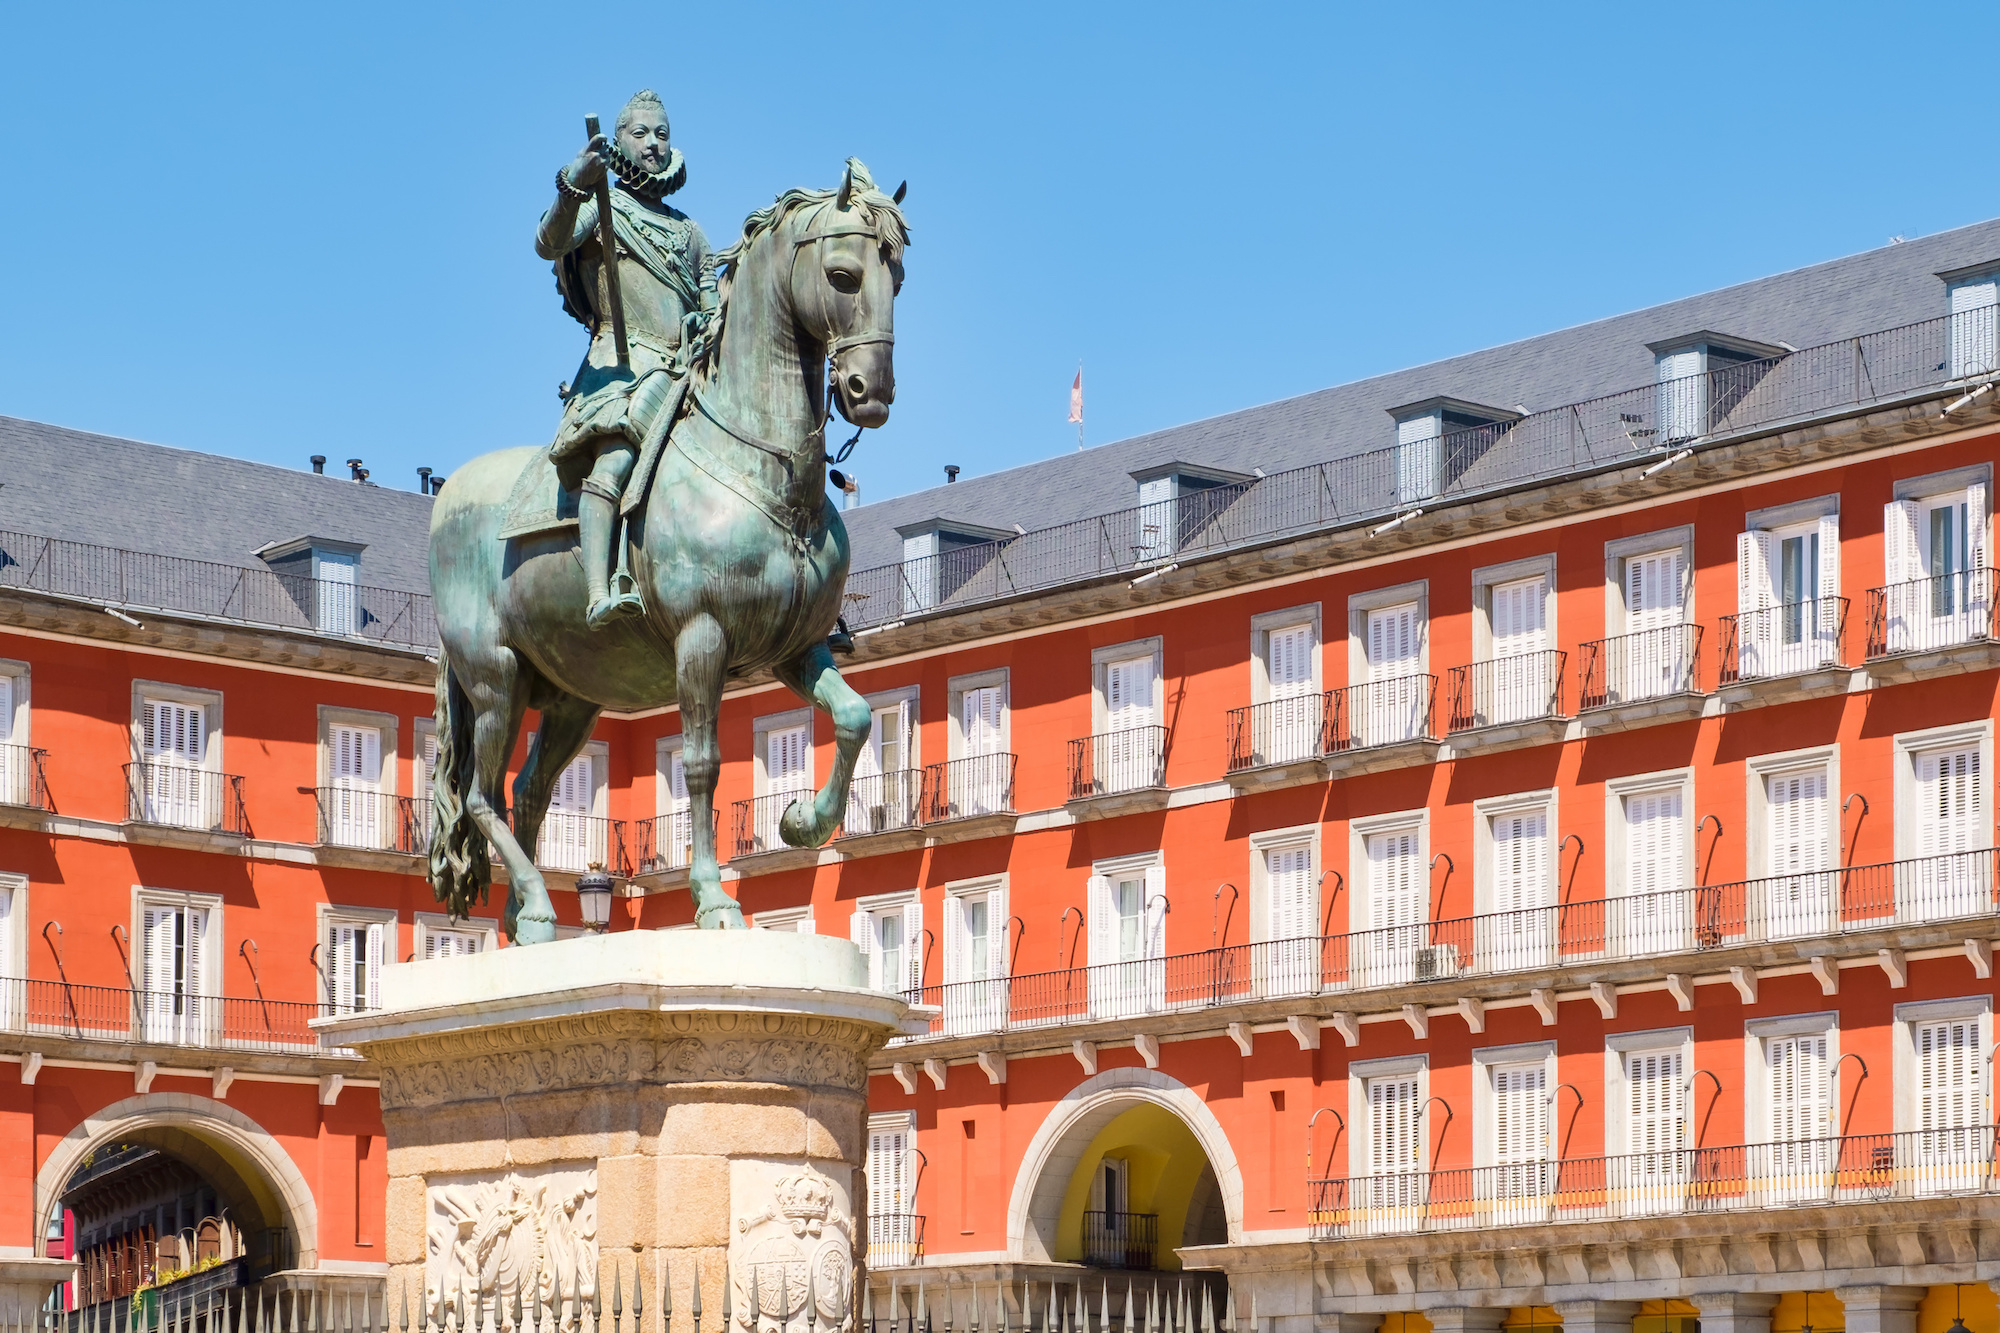 Plaza Mayor, a historic square in Madrid with the equestrian statue of King Philip III